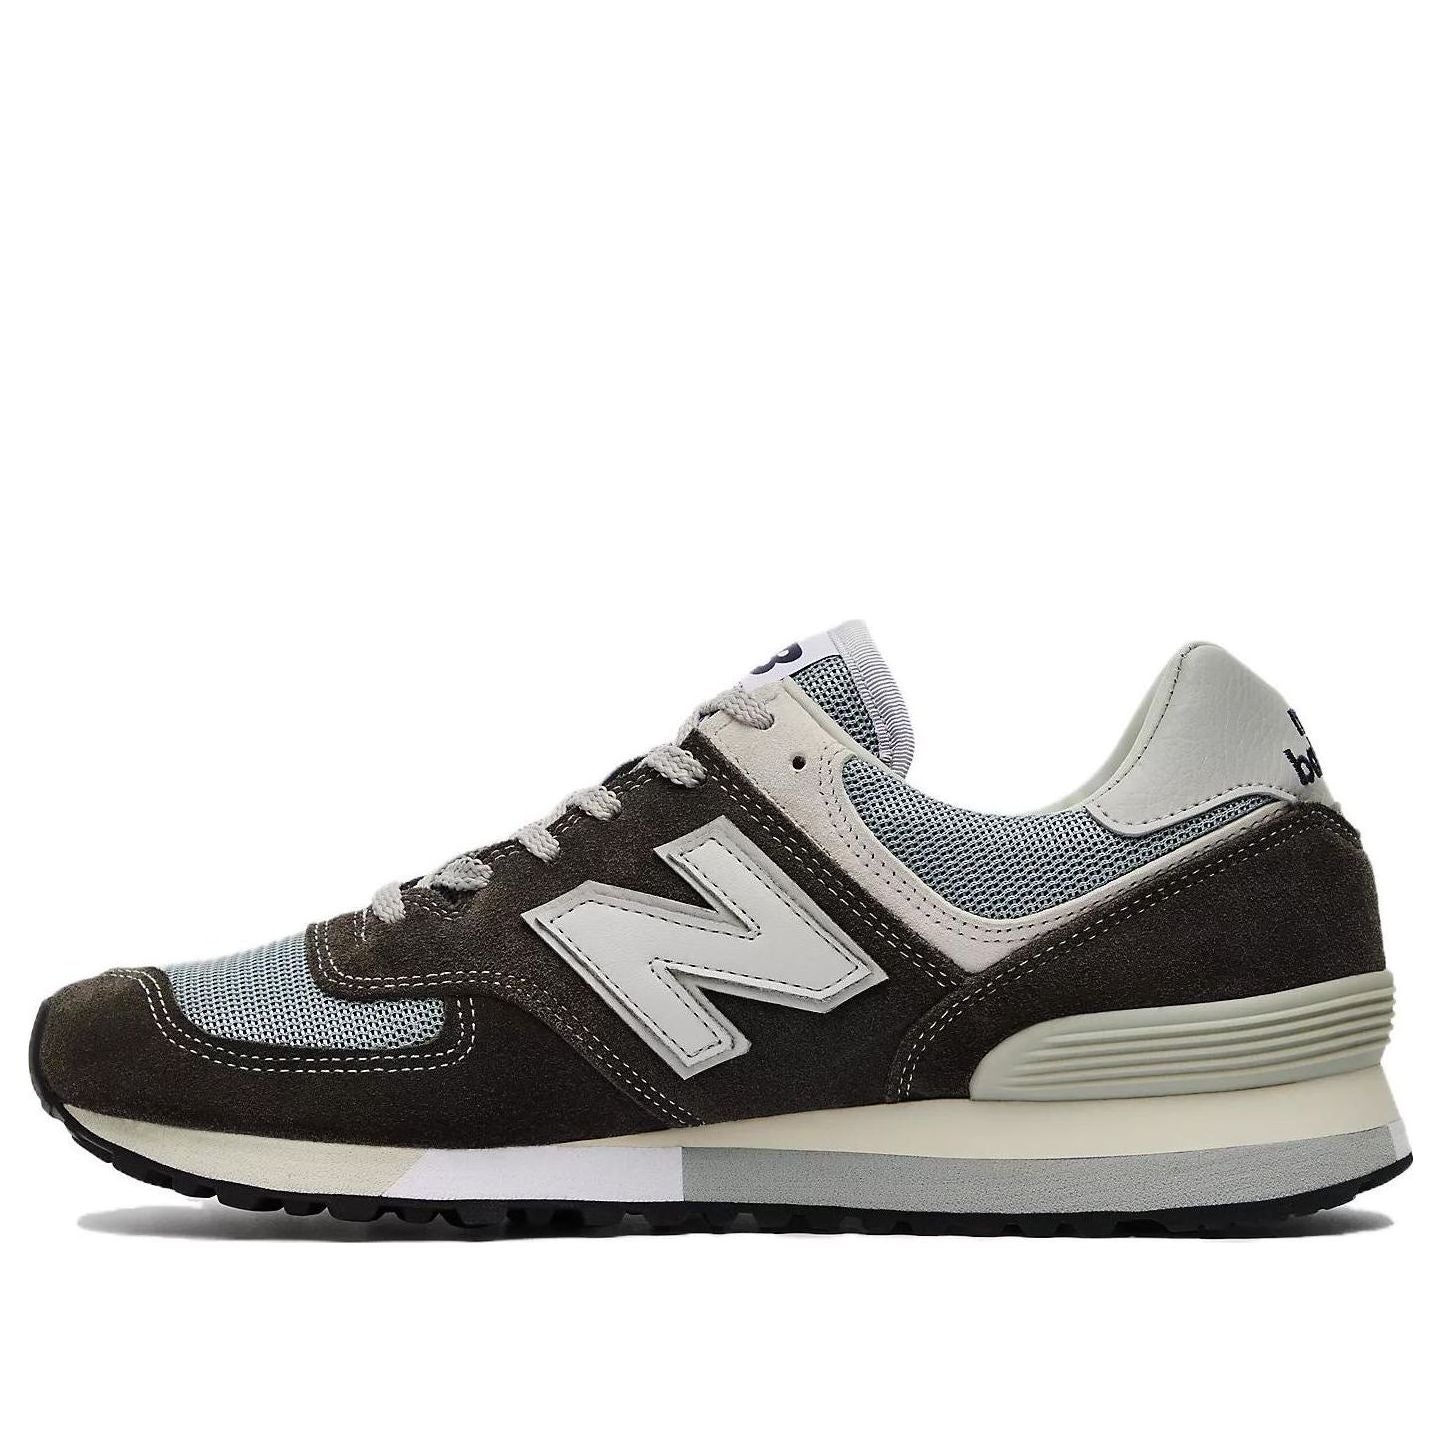 New Balance 576 Made in England '35th Anniversary - Elephant Skin Stormy  Sea' OU576AGG